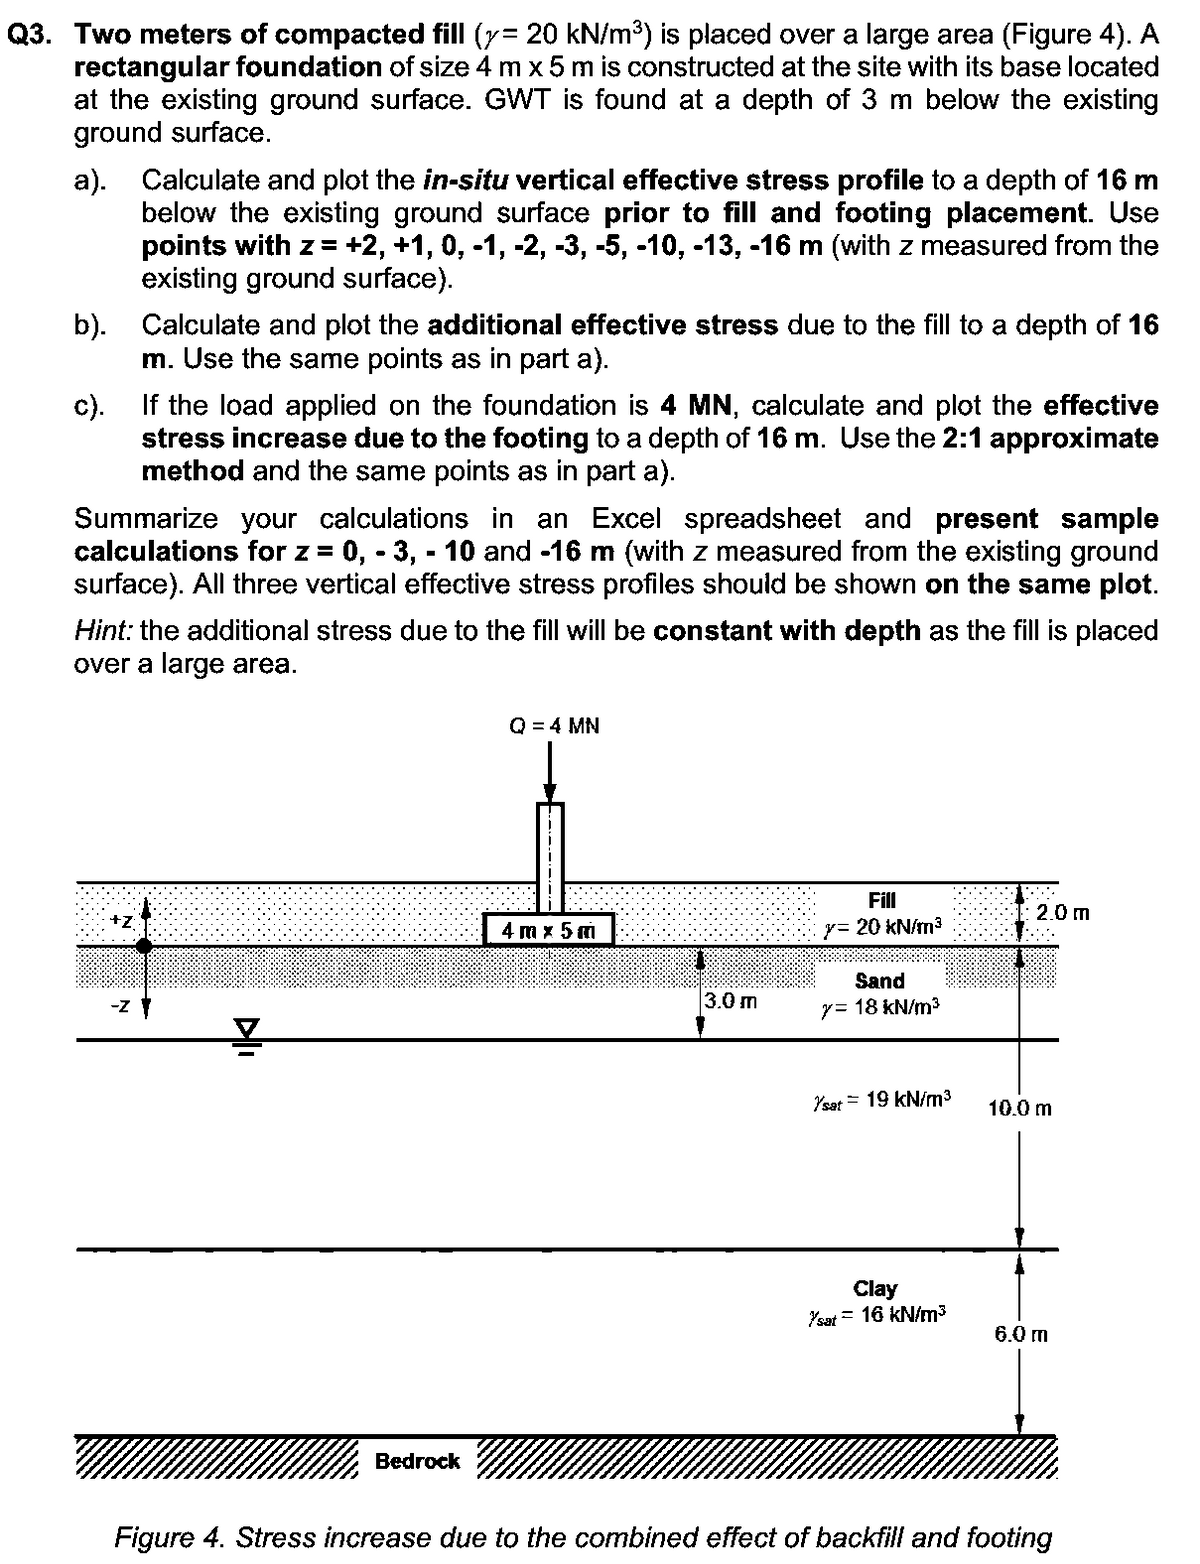 Q3. Two meters of compacted fill (y= 20 kN/m³) is placed over a large area (Figure 4). A
rectangular foundation of size 4 m x 5 m is constructed at the site with its base located
at the existing ground surface. GWT is found at a depth of 3 m below the existing
ground surface.
a). Calculate and plot the in-situ vertical effective stress profile to a depth of 16 m
below the existing ground surface prior to fill and footing placement. Use
points with z = +2, +1, 0, -1, -2, -3, -5, -10, -13, -16 m (with z measured from the
existing ground surface).
b). Calculate and plot the additional effective stress due to the fill to a depth of 16
m. Use the same points as in part a).
c). If the load applied on the foundation is 4 MN, calculate and plot the effective
stress increase due to the footing to a depth of 16 m. Use the 2:1 approximate
method and the same points as in part a).
Summarize your calculations in an Excel spreadsheet and present sample
calculations for z = 0, -3, -10 and -16 m (with z measured from the existing ground
surface). All three vertical effective stress profiles should be shown on the same plot.
Hint: the additional stress due to the fill will be constant with depth as the fill is placed
over a large area.
-Z
DI
Bedrock
Q = 4 MN
4 mx 5 m
3.0 m
Fill
y= 20 kN/m³
Sand
y = 18 kN/m³
Ysat 19 kN/m³
Clay
Ysat = 16 kN/m³
2.0 m
JA
10.0 m
6.0 m
Figure 4. Stress increase due to the combined effect of backfill and footing